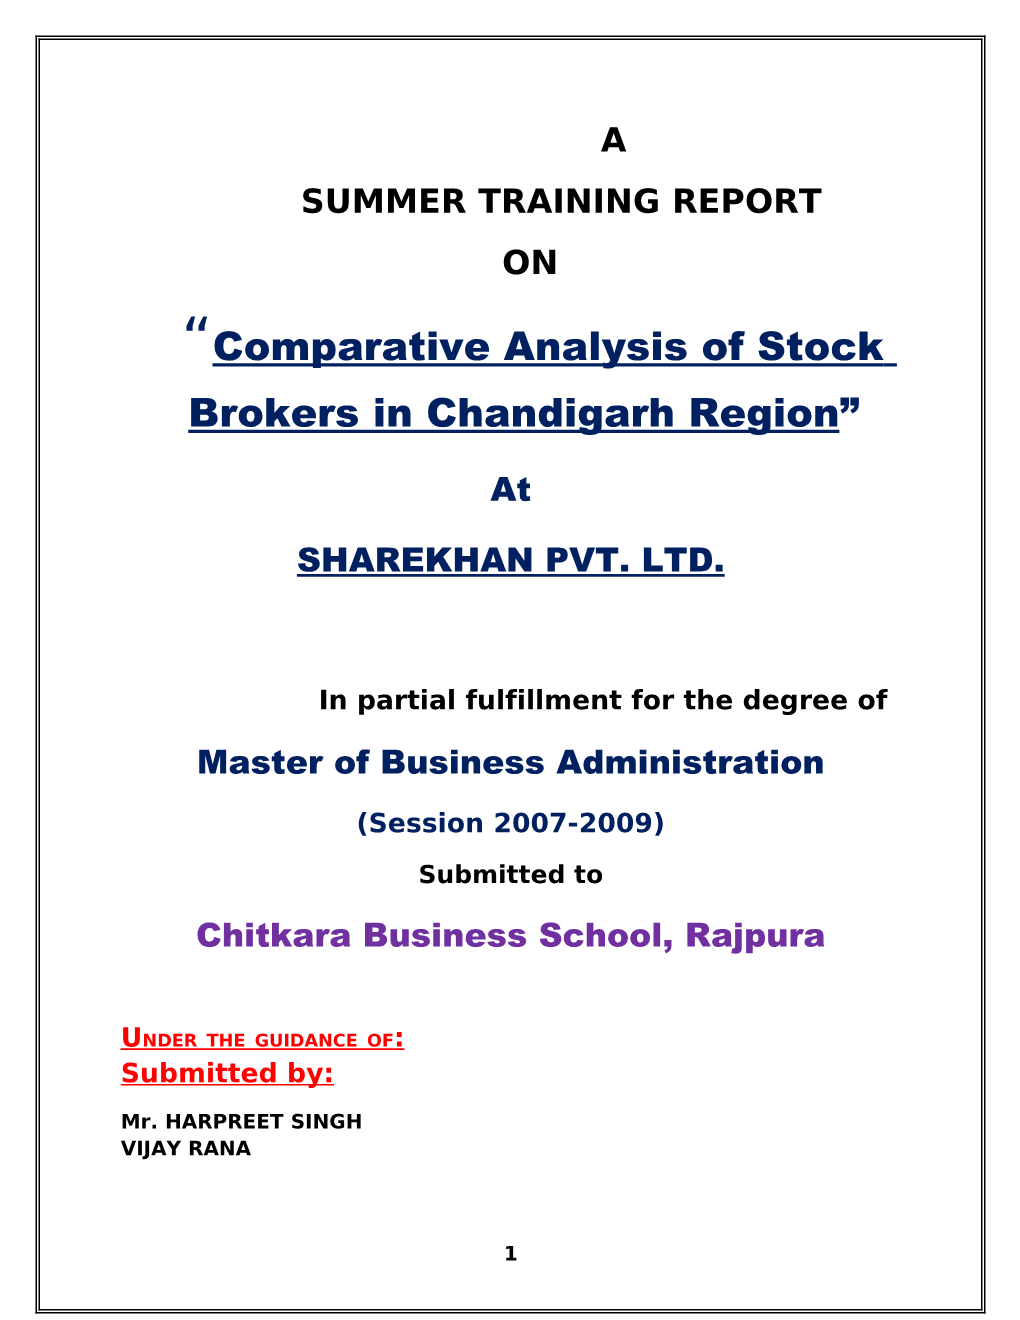 “Comparative Analysis of Stock Brokers in Chandigarh Region”